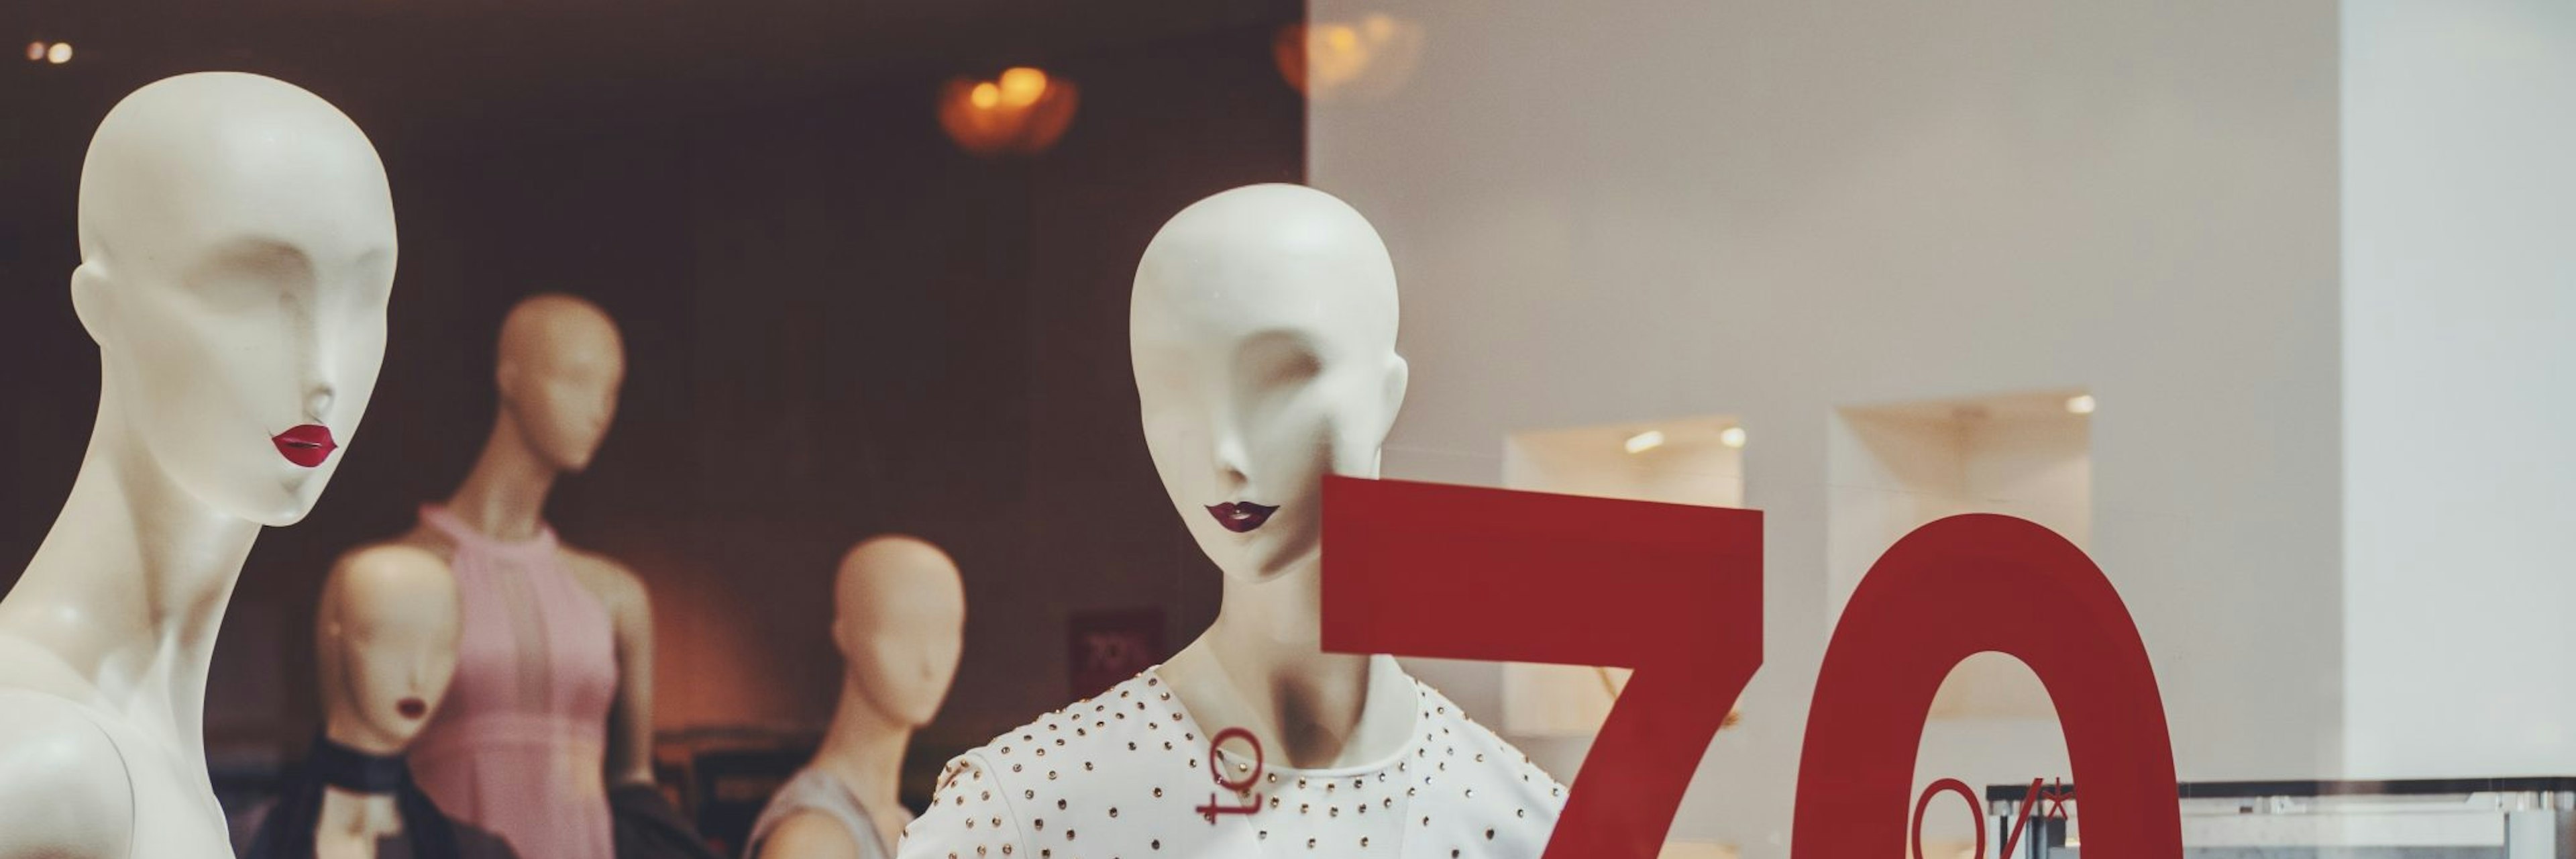 Mannequins in shop window with sale sign